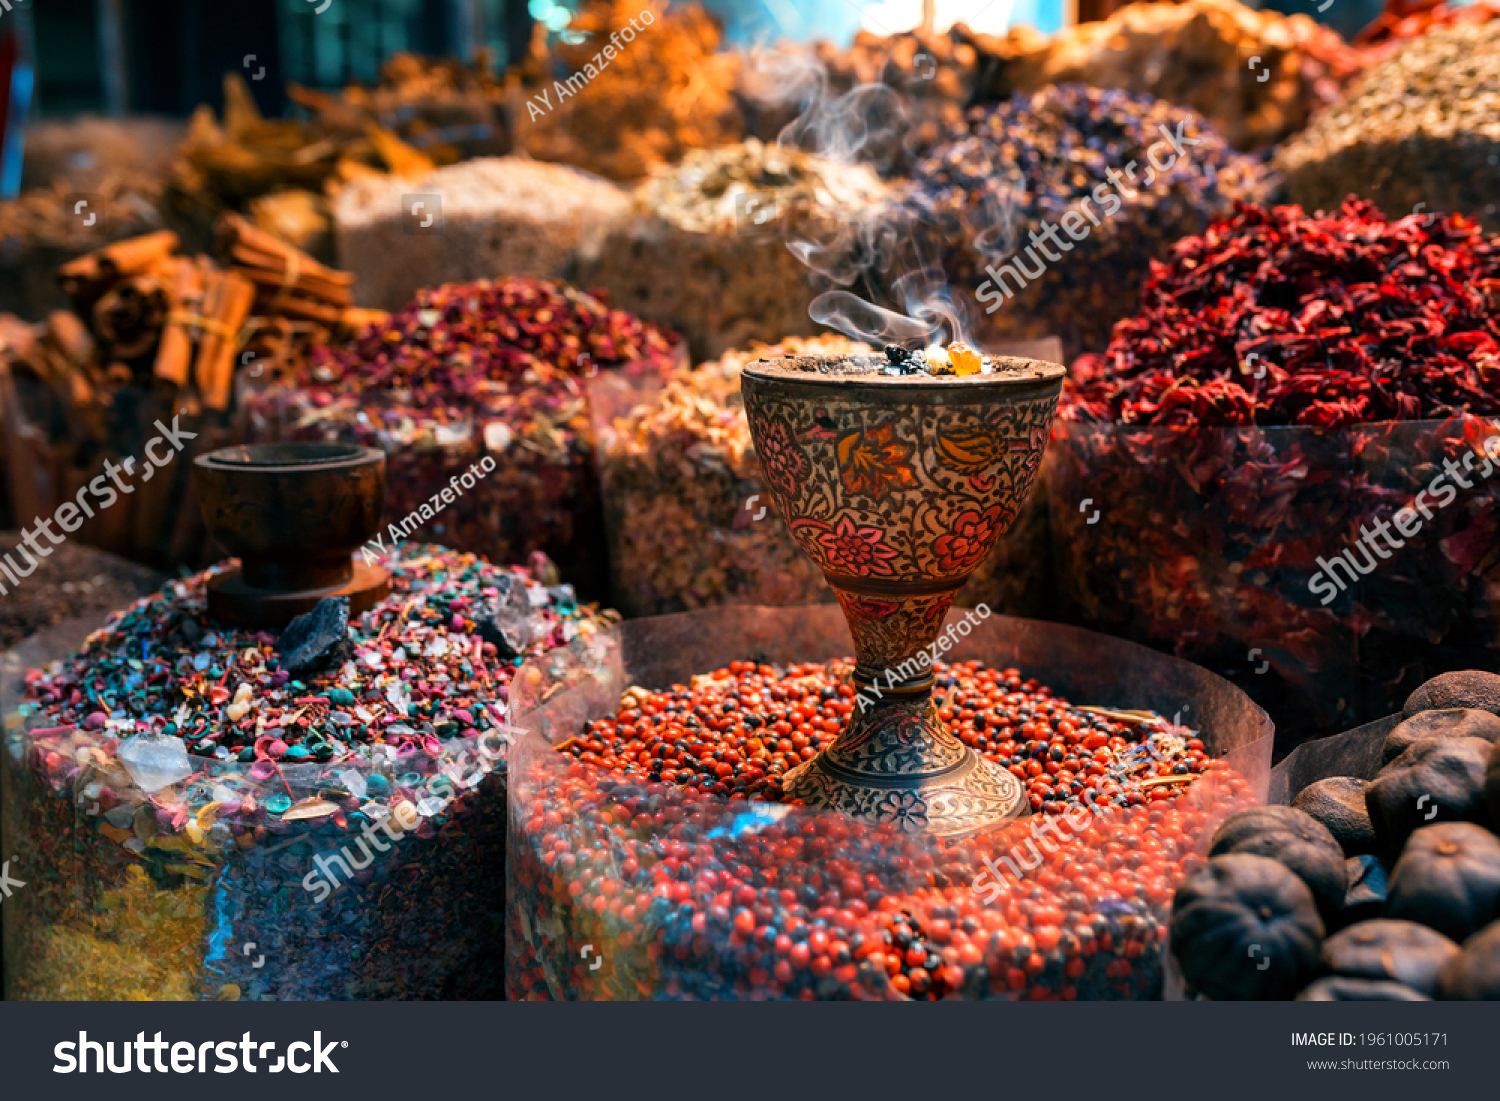 Old Market Shop with oriental spices and incenses. Dubai, Deira Old market #1961005171